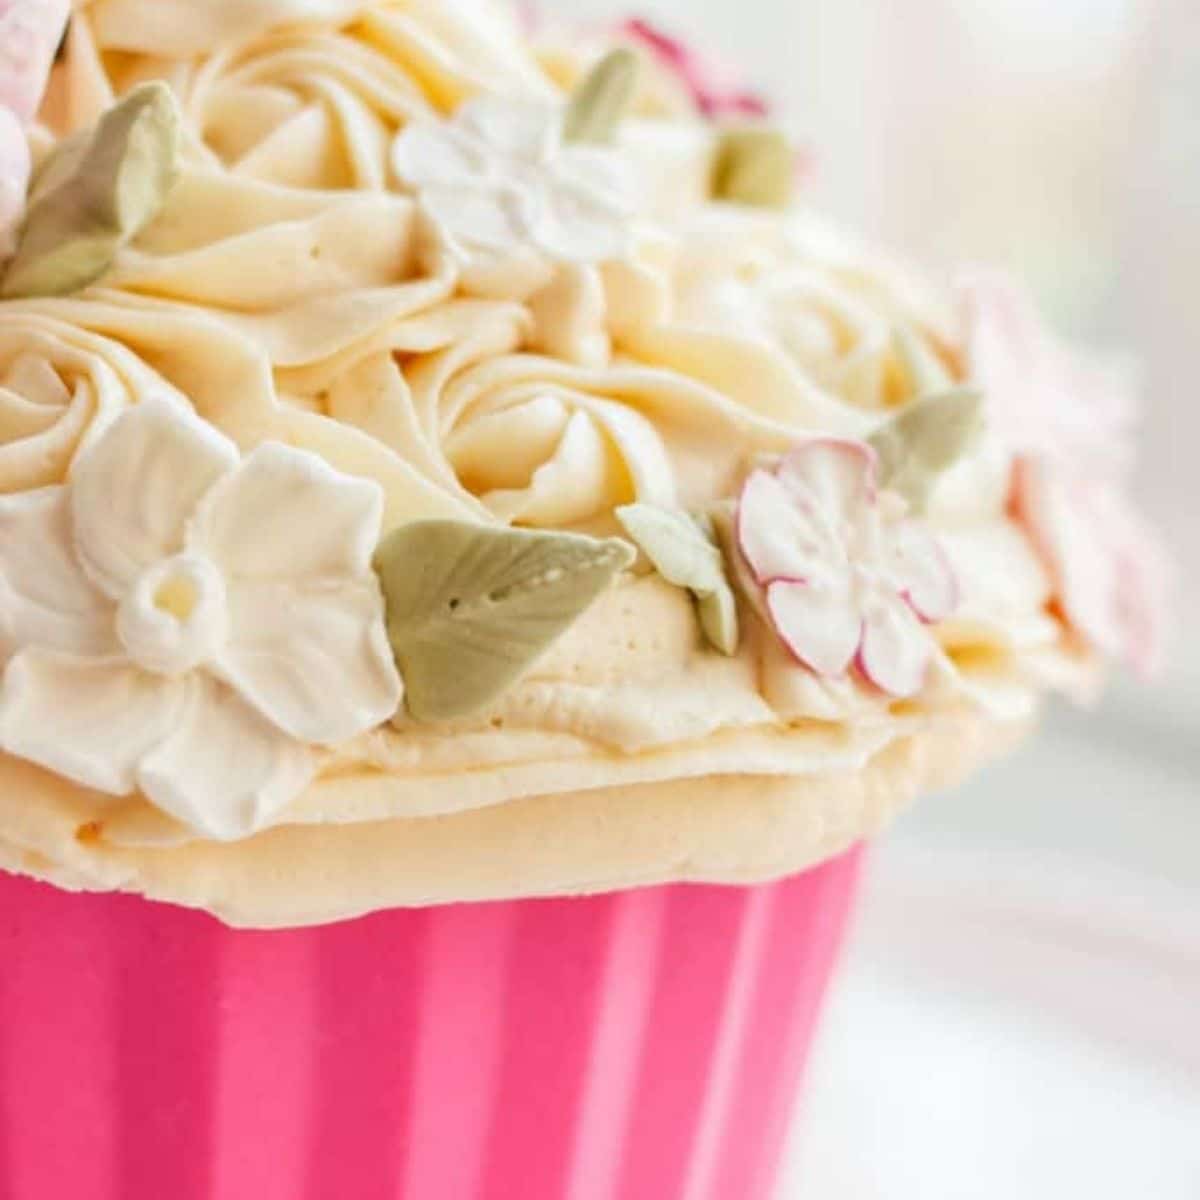 How to Make a Giant Cupcake - Basics 2: Filling, Baking and